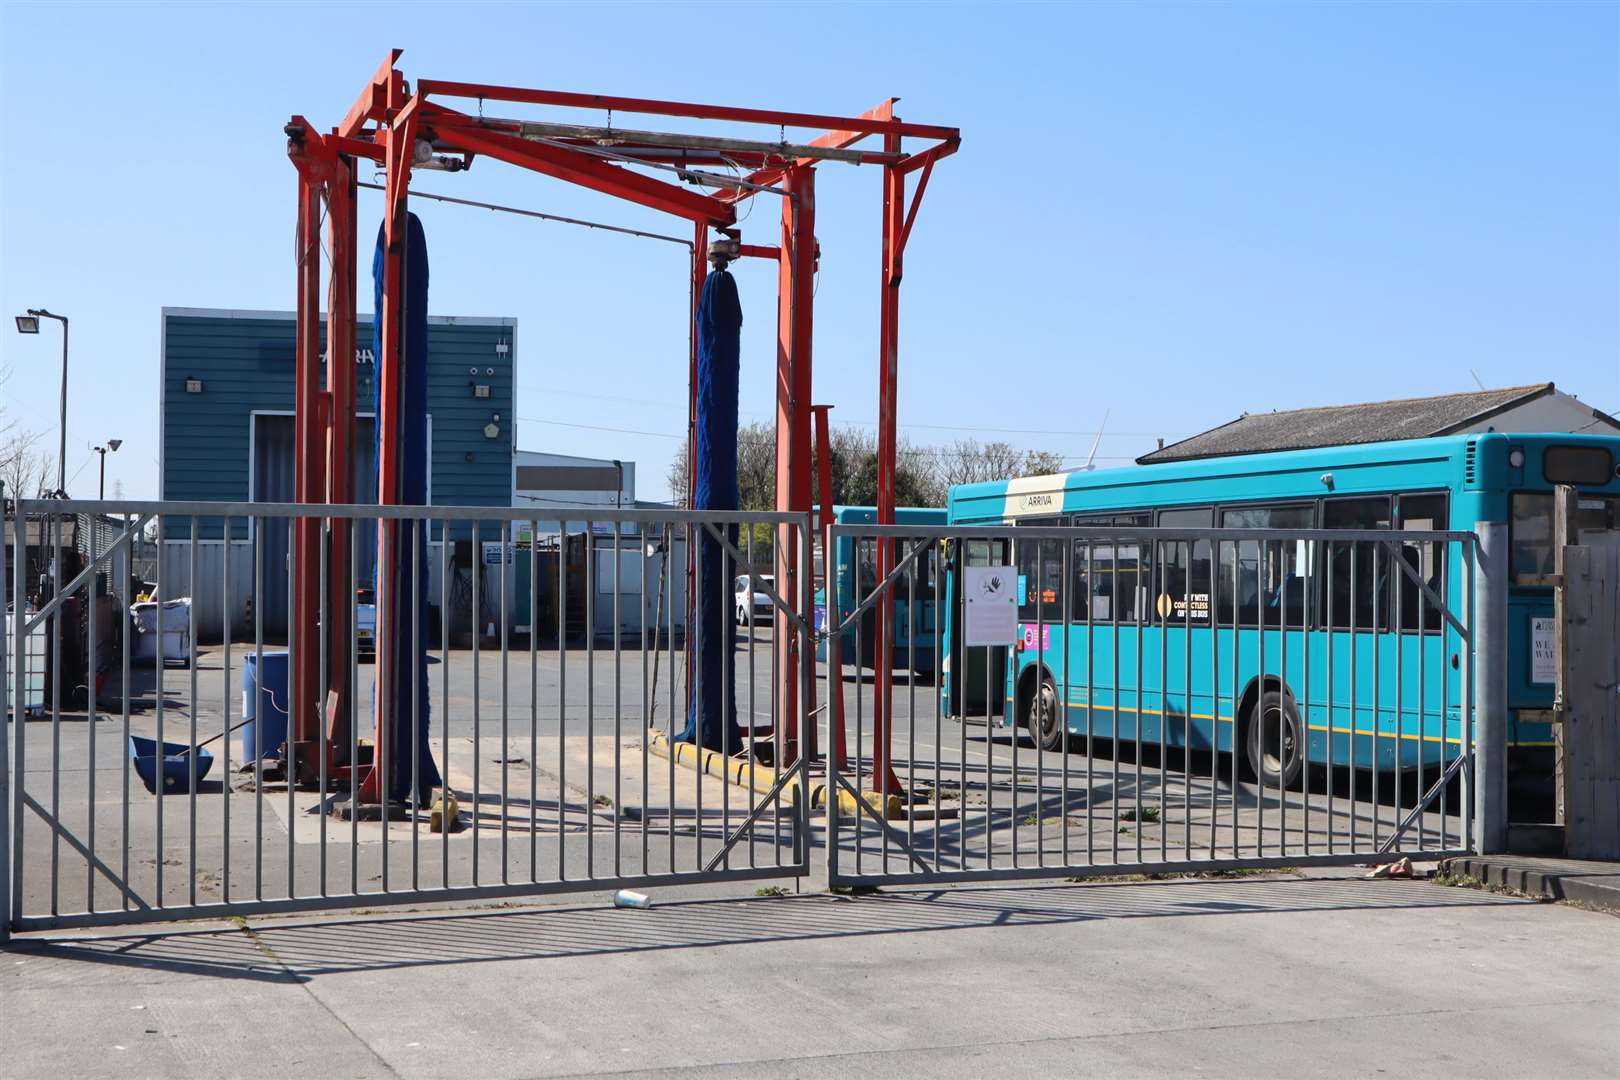 The Arriva bus depot in Sheerness